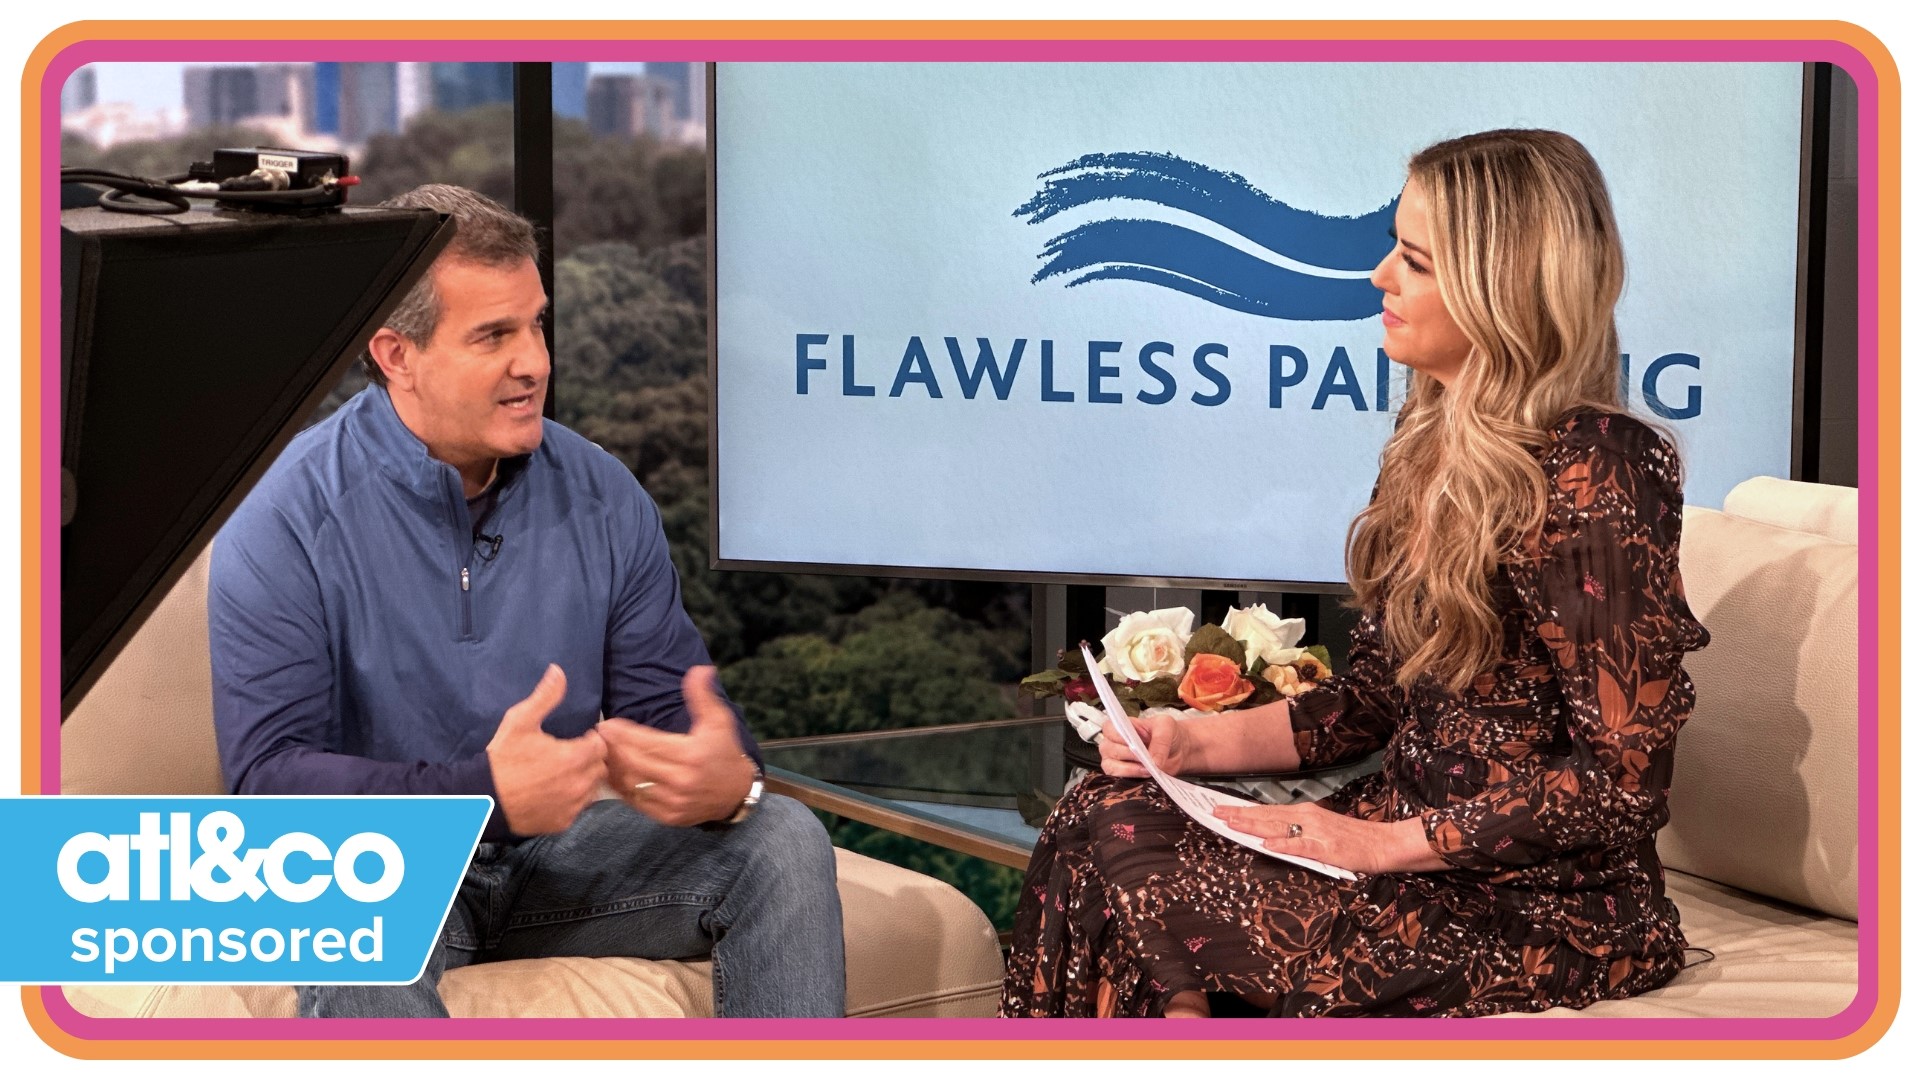 Flawless Painting CEO Scott Csaszar shares how his company can help transform the look of your home or business. Learn how you can save $200!